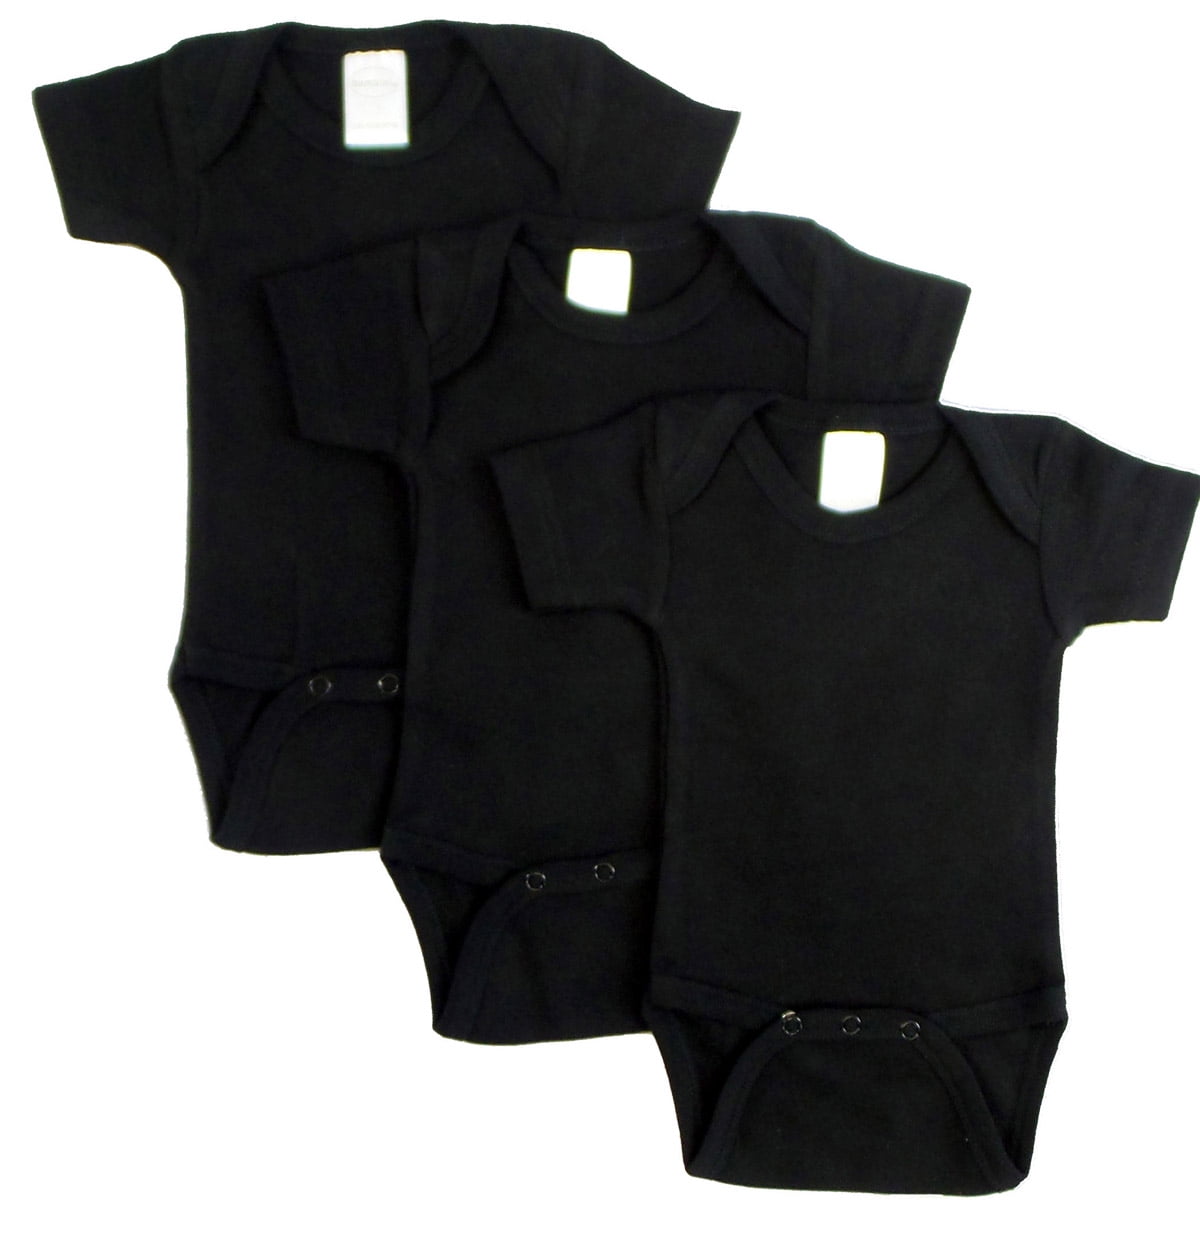 0010bl3-s Short Sleeve - Black, Small - Pack Of 3